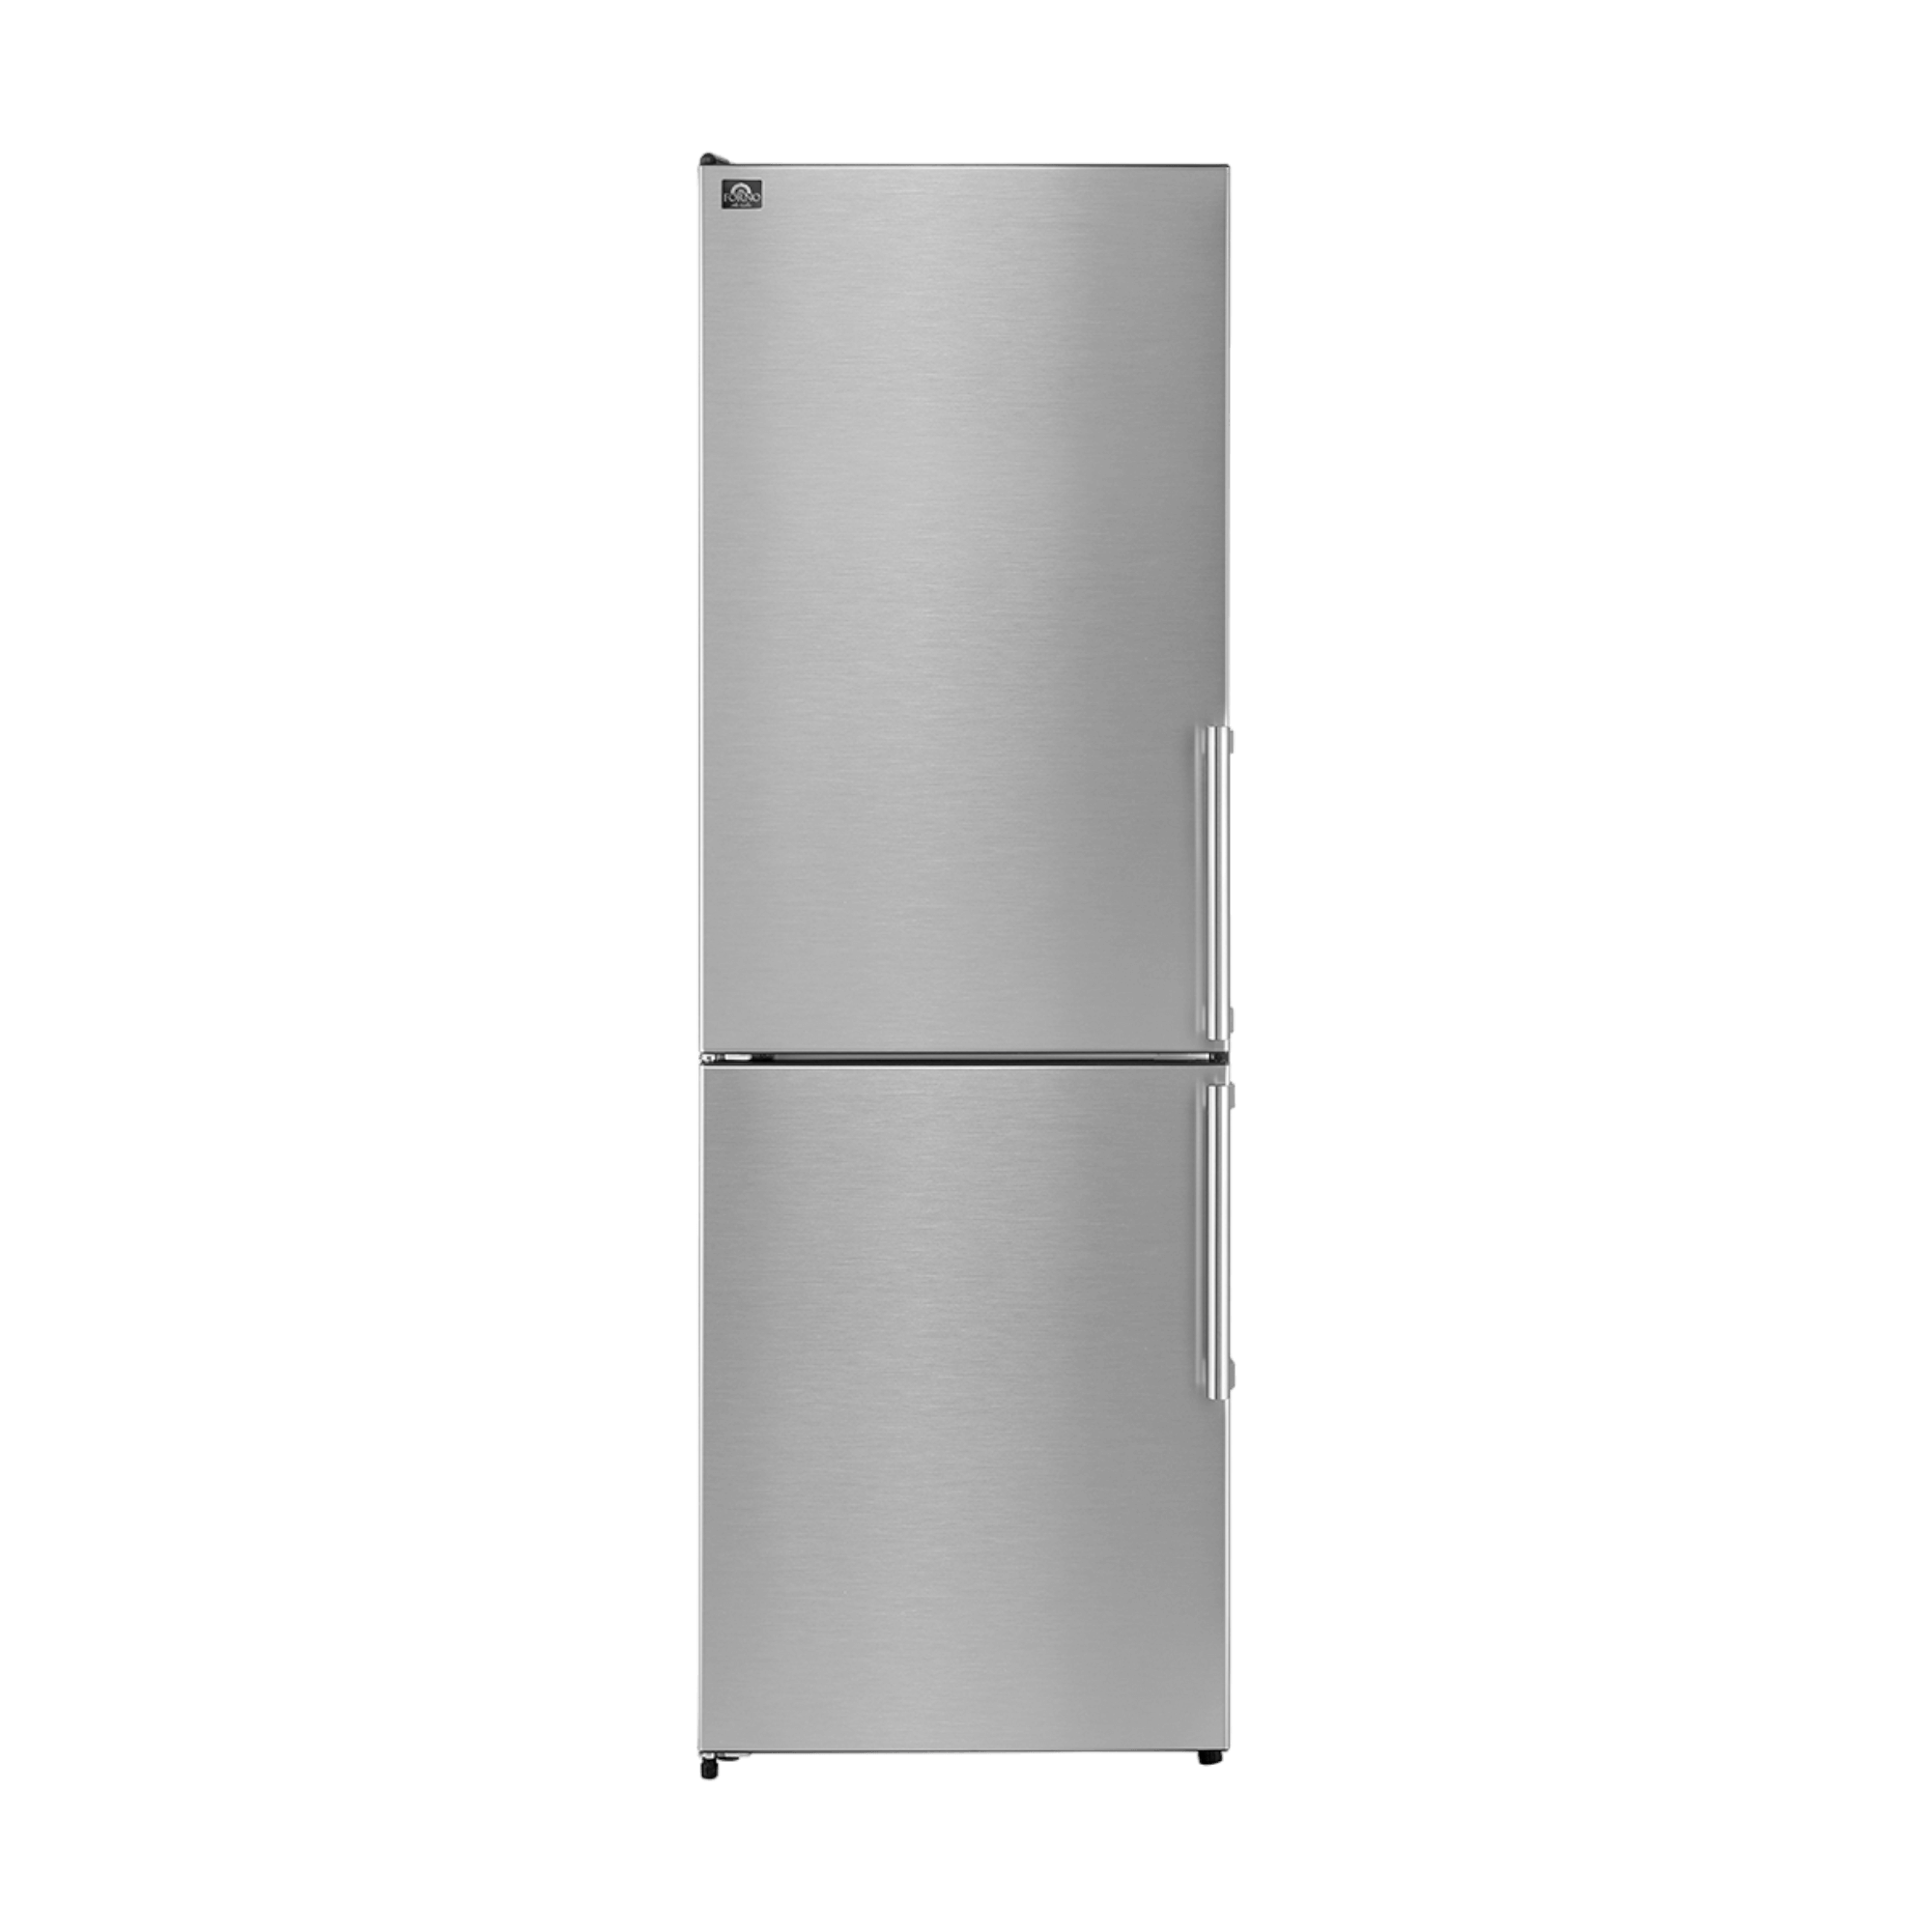 Forno 23.4" 10.8 Cu. Ft. Left Swing Refrigerator with Bottom Freezer in Stainless Steel, FFFFD1778-24LS Wine Coolers Empire